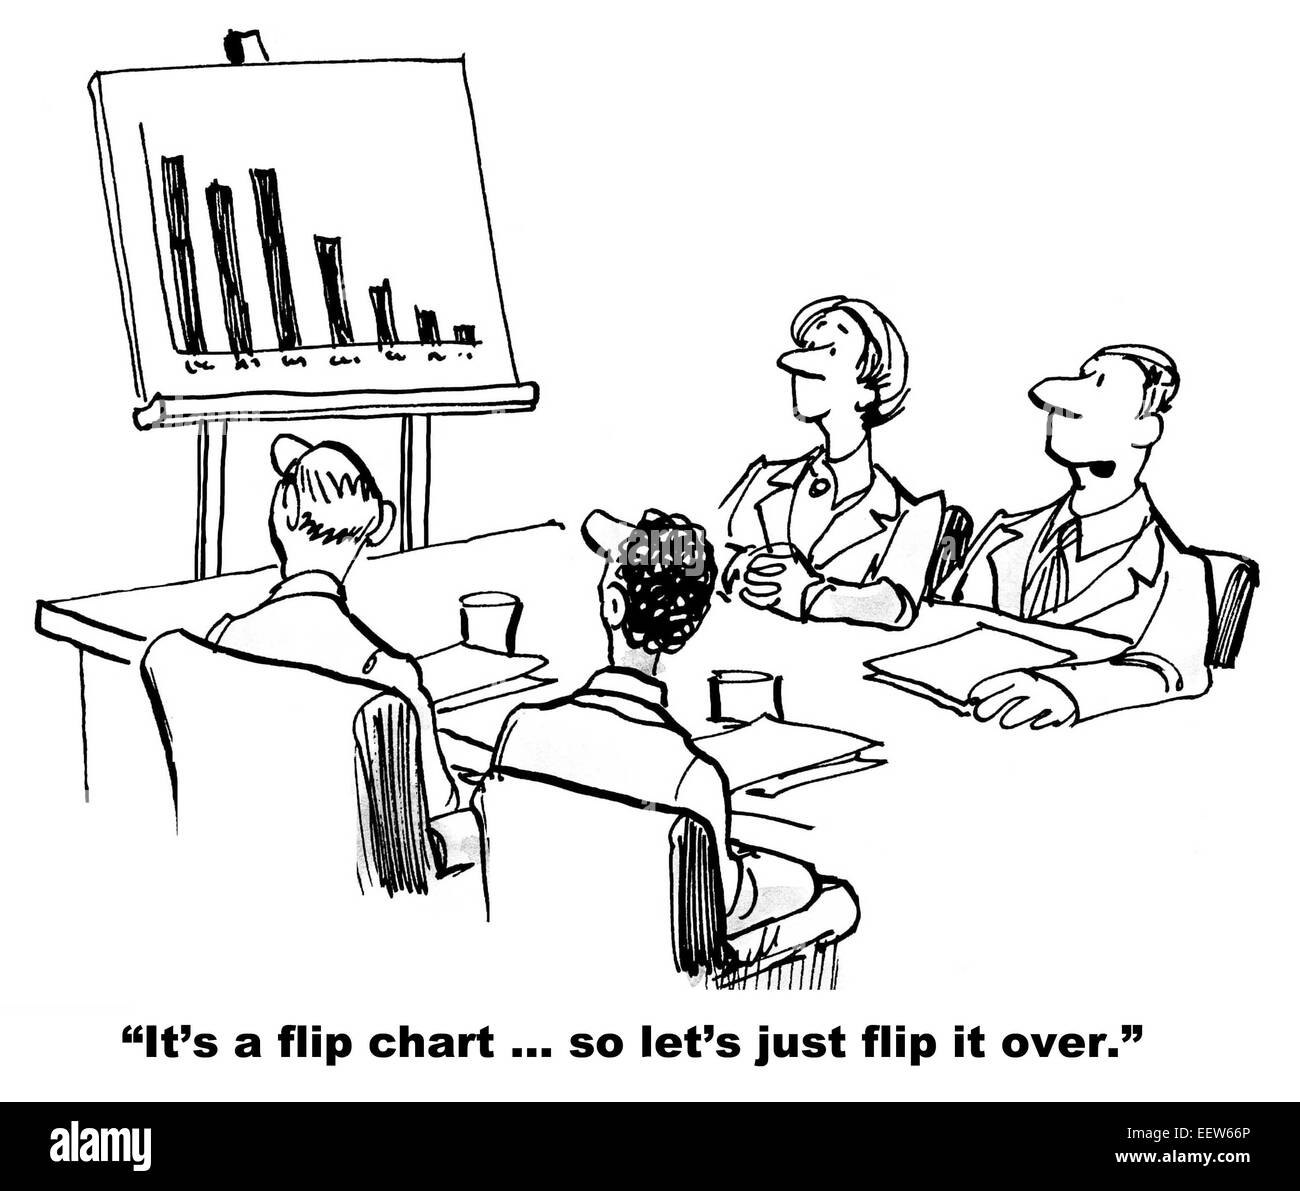 Cartoon of business meeting and chart showing negative results, man says 'it's a flip chart... so let's just flip it over'. Stock Photo